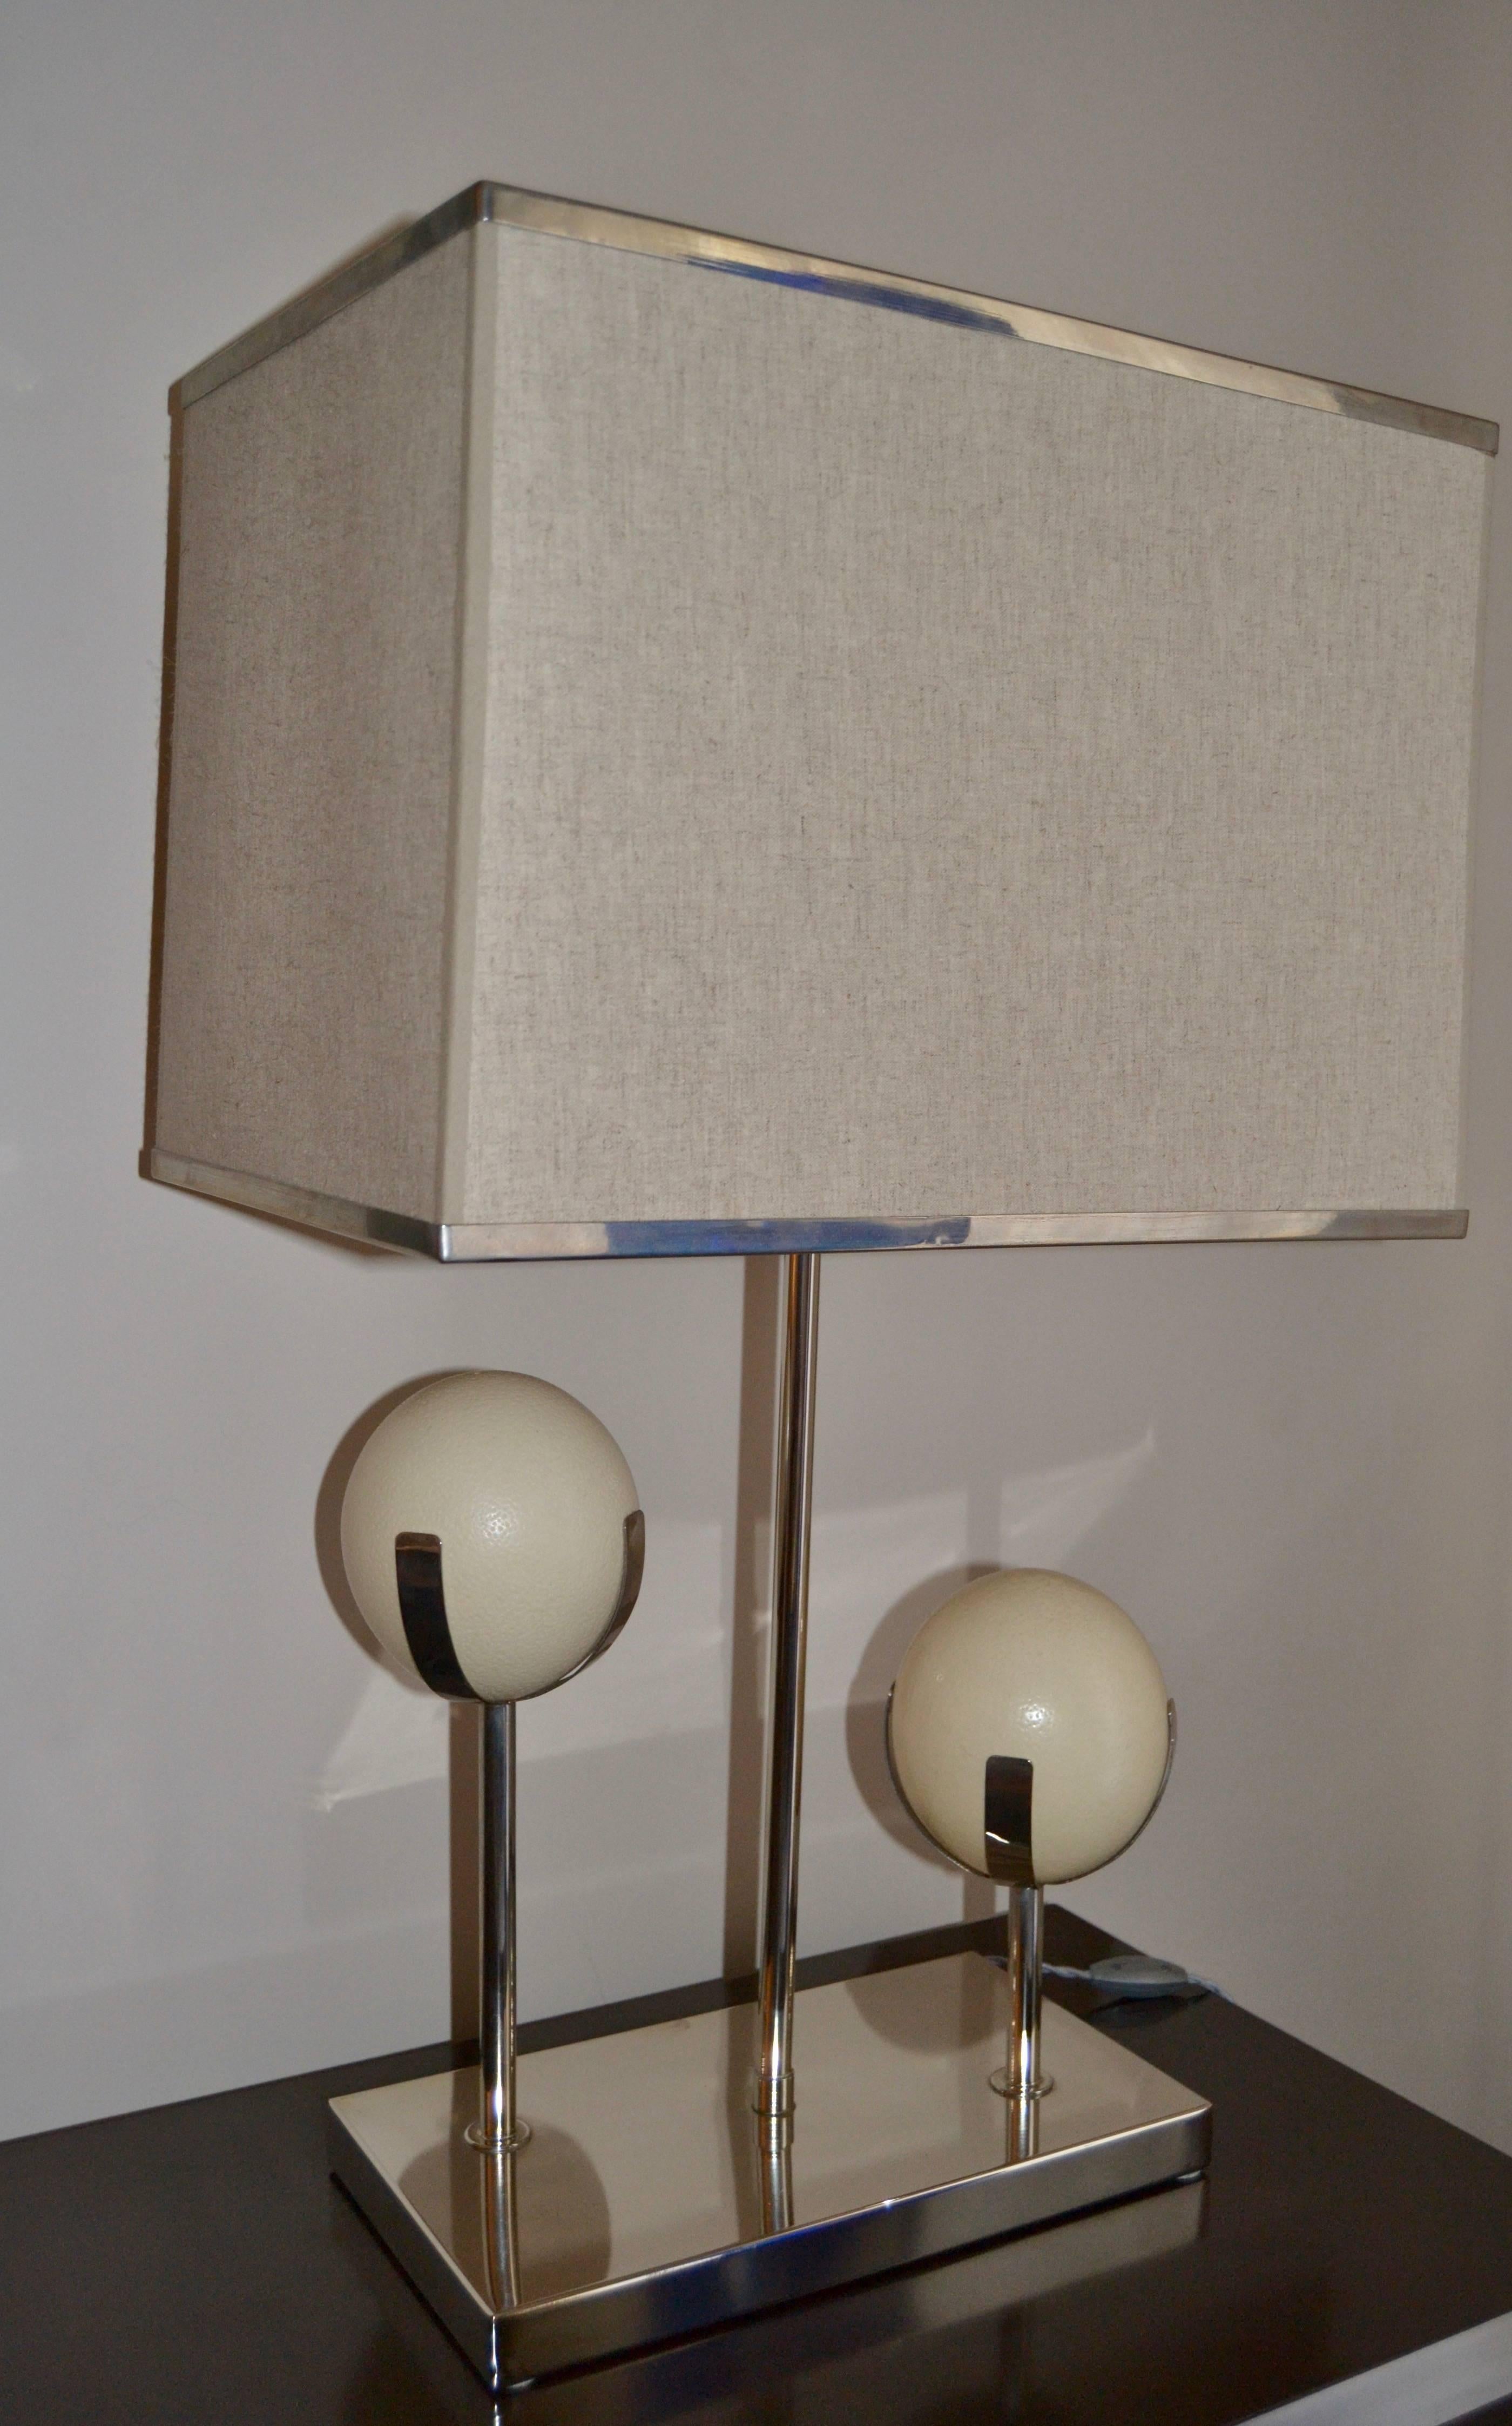 Large 1970s chromed steel and two ostrich egg shell table lamp
Rewired with New Shade
Great vintage condition.